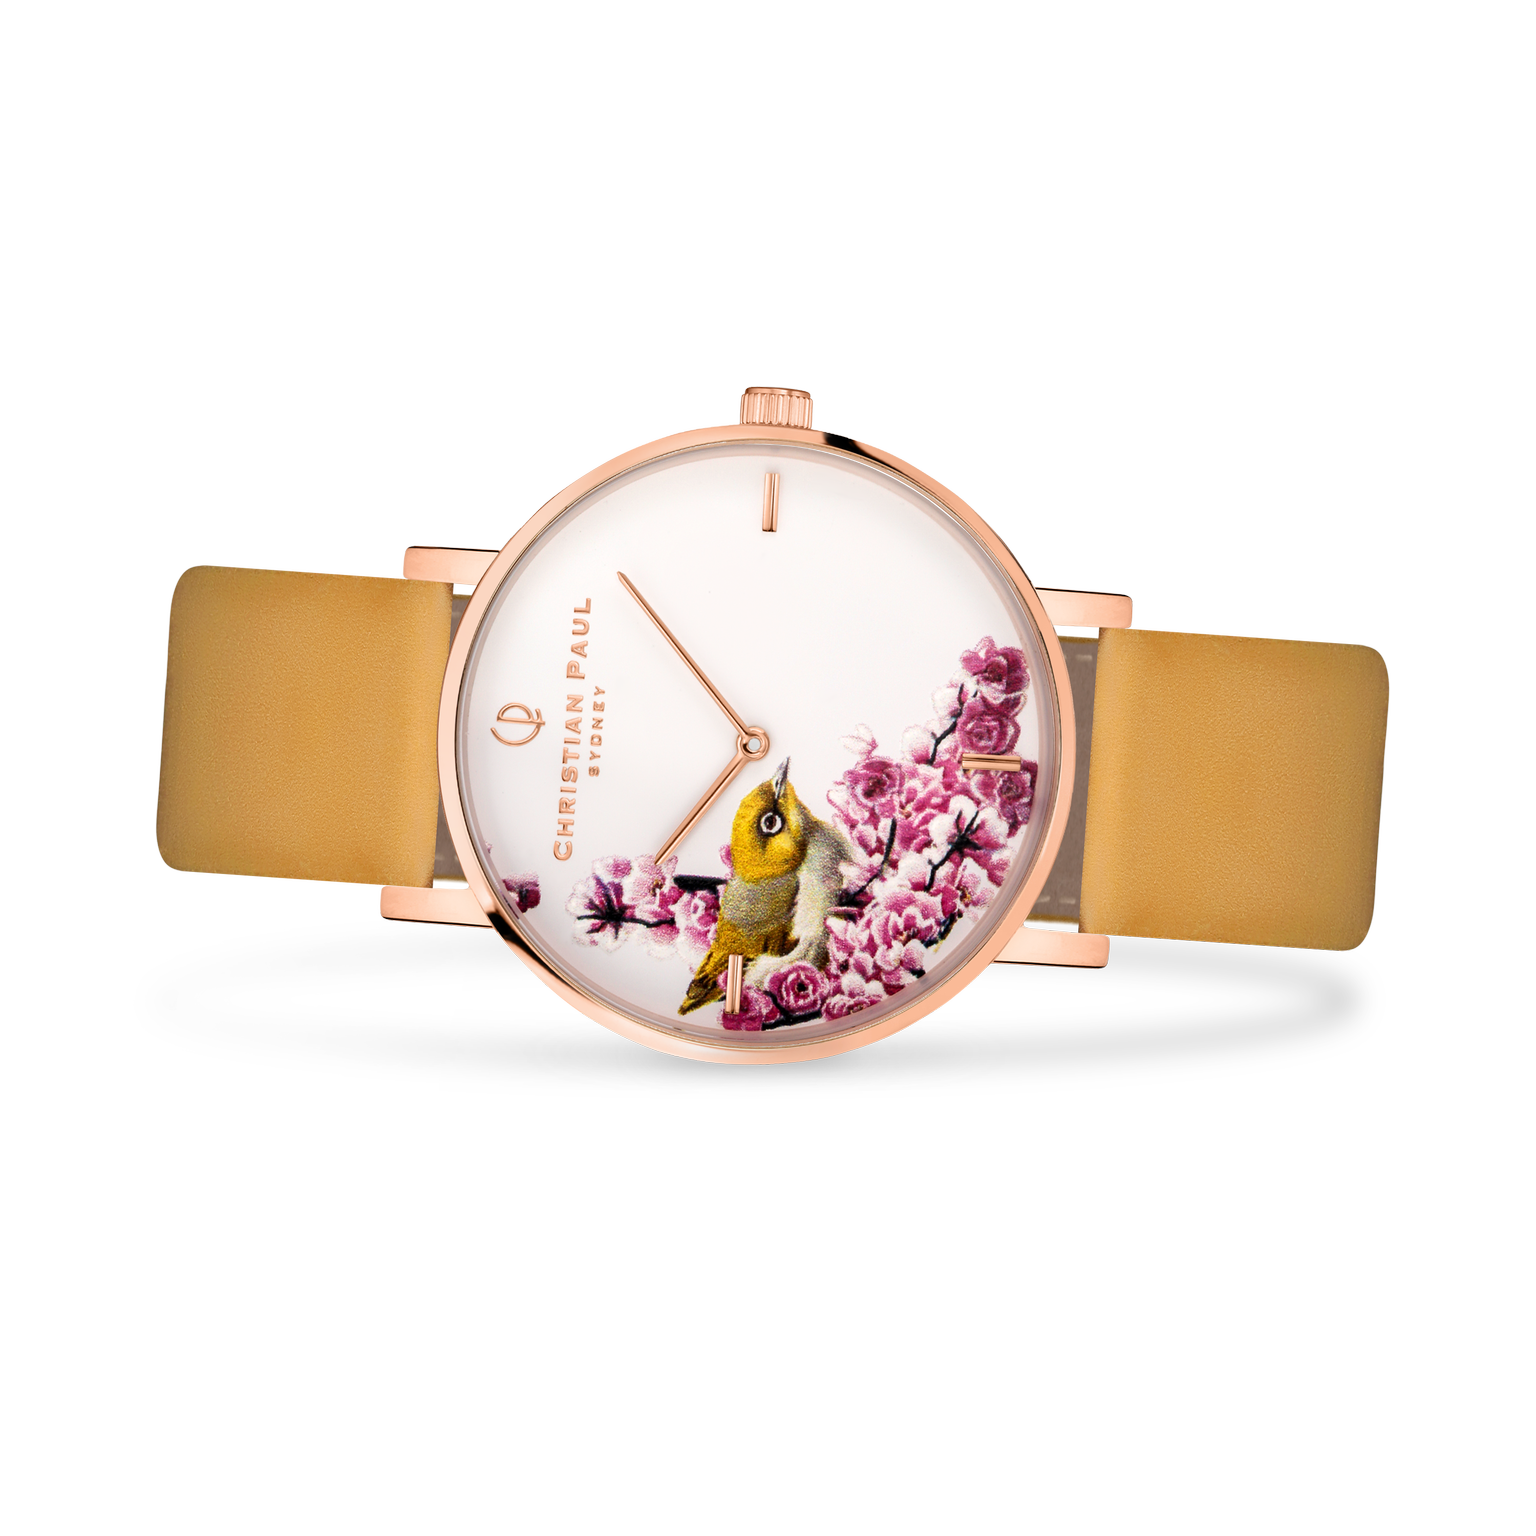 Luxury floral mustard and rose gold watch